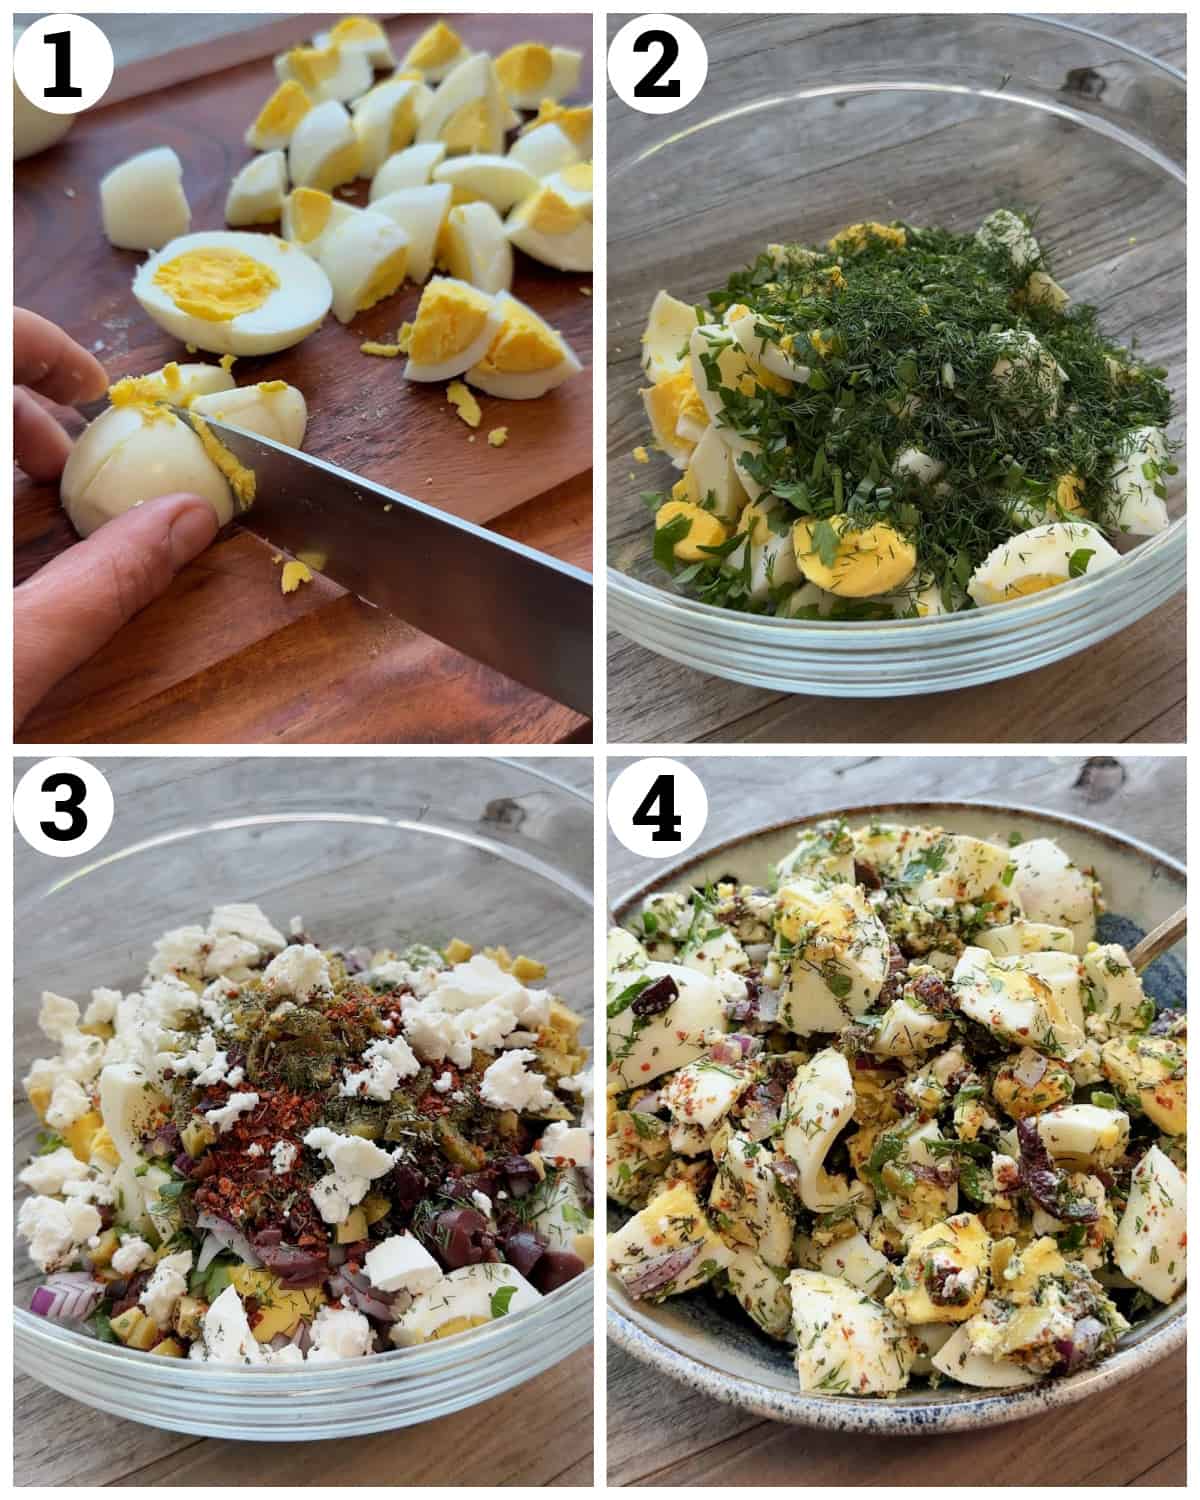 Chop the eggs, mix with the herbs, vegetables and spices. Chill in the fridge for 30 minutes.